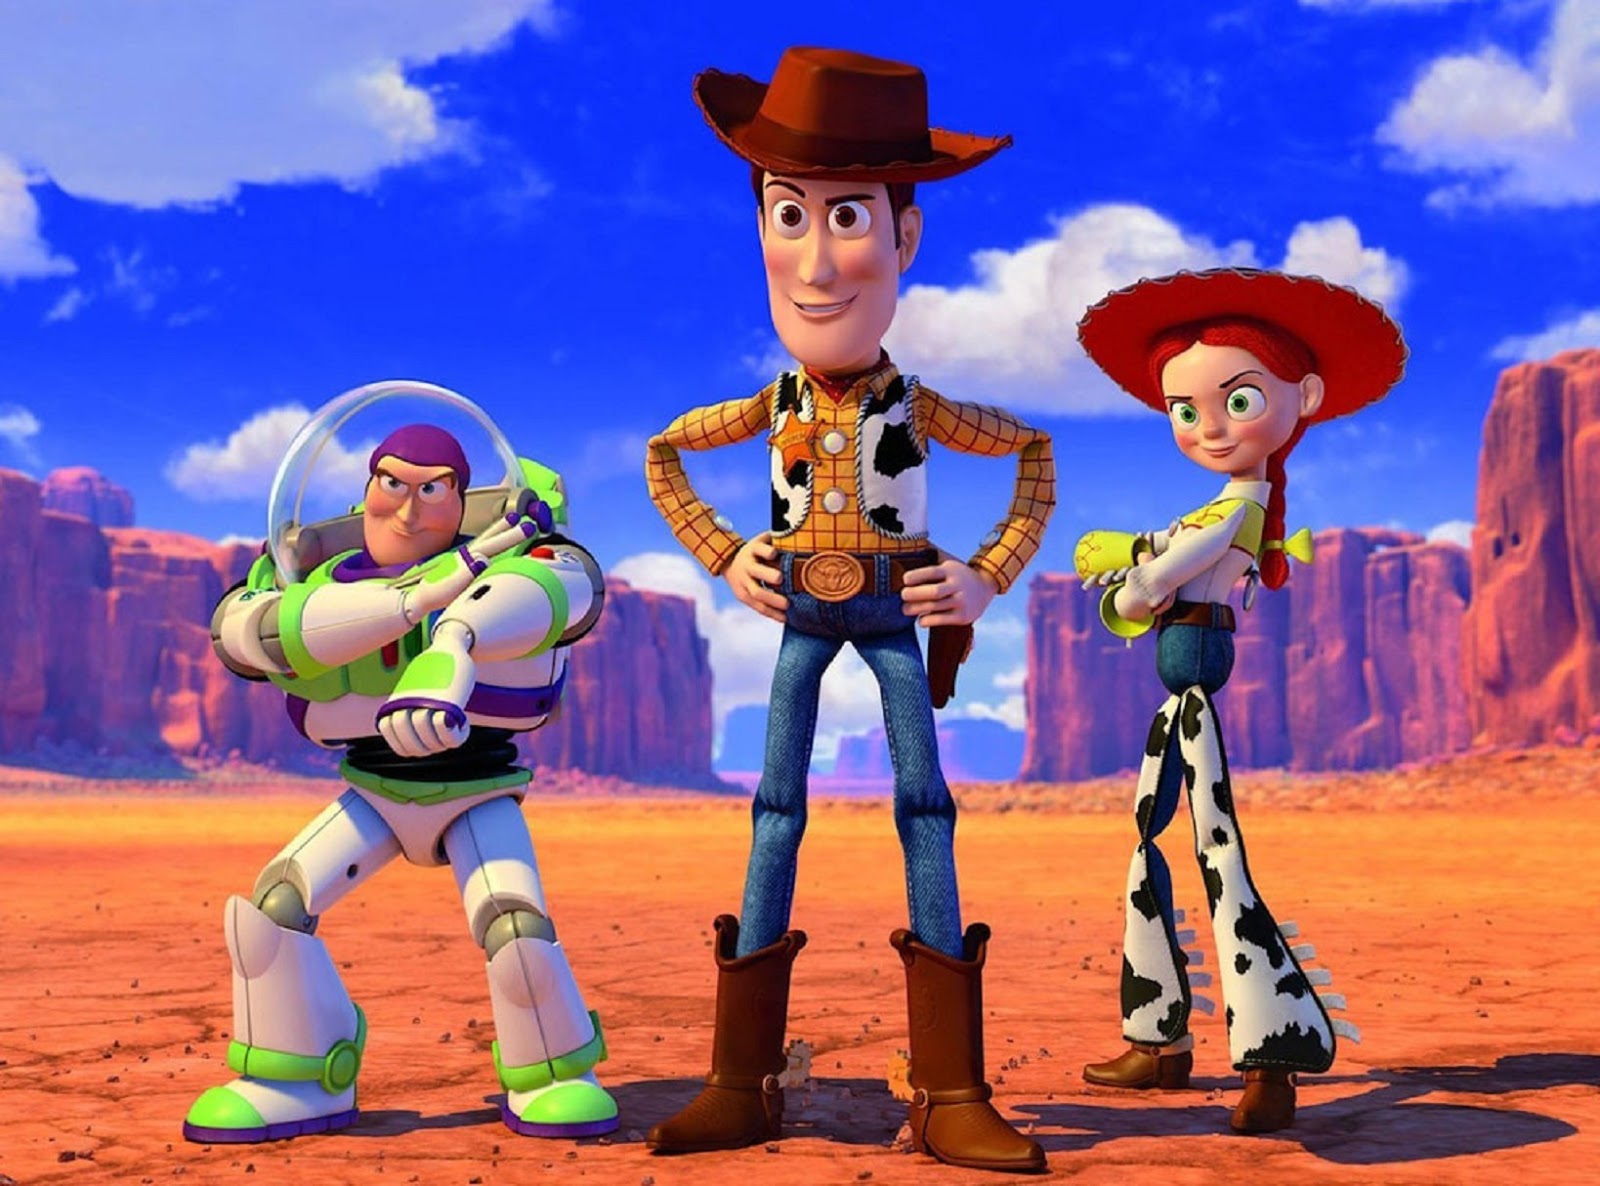 Disney HD Wallpapers Toy Story HD Wallpapers